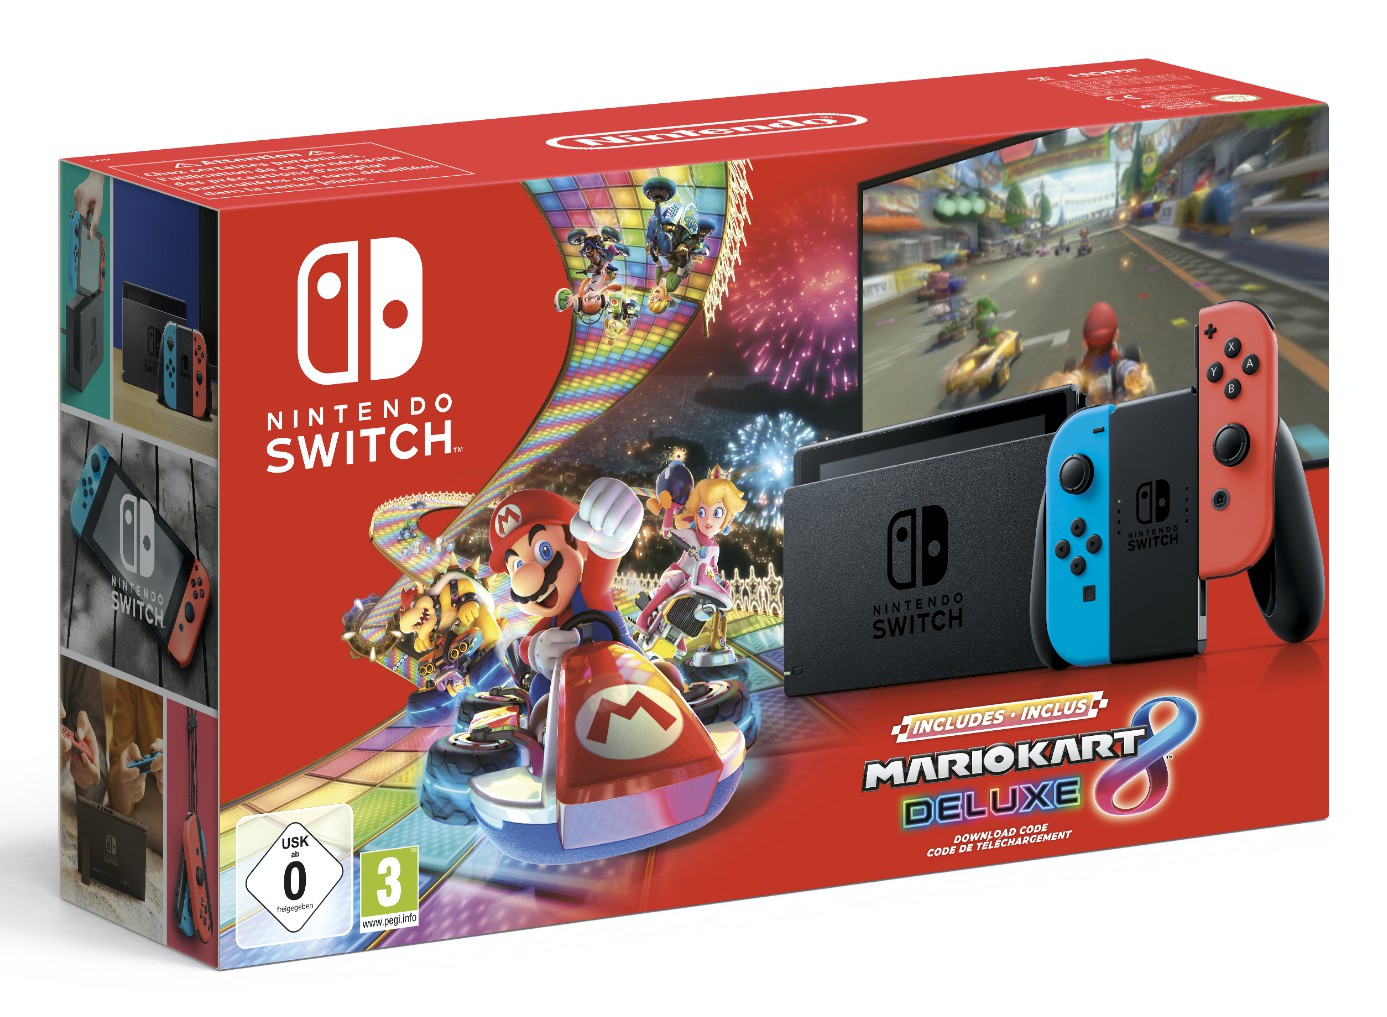 Nintendo Switch Mario Kart Deluxe 8 Bundle (with Neon Red and Neon Blue Joy- Con) V 1.1